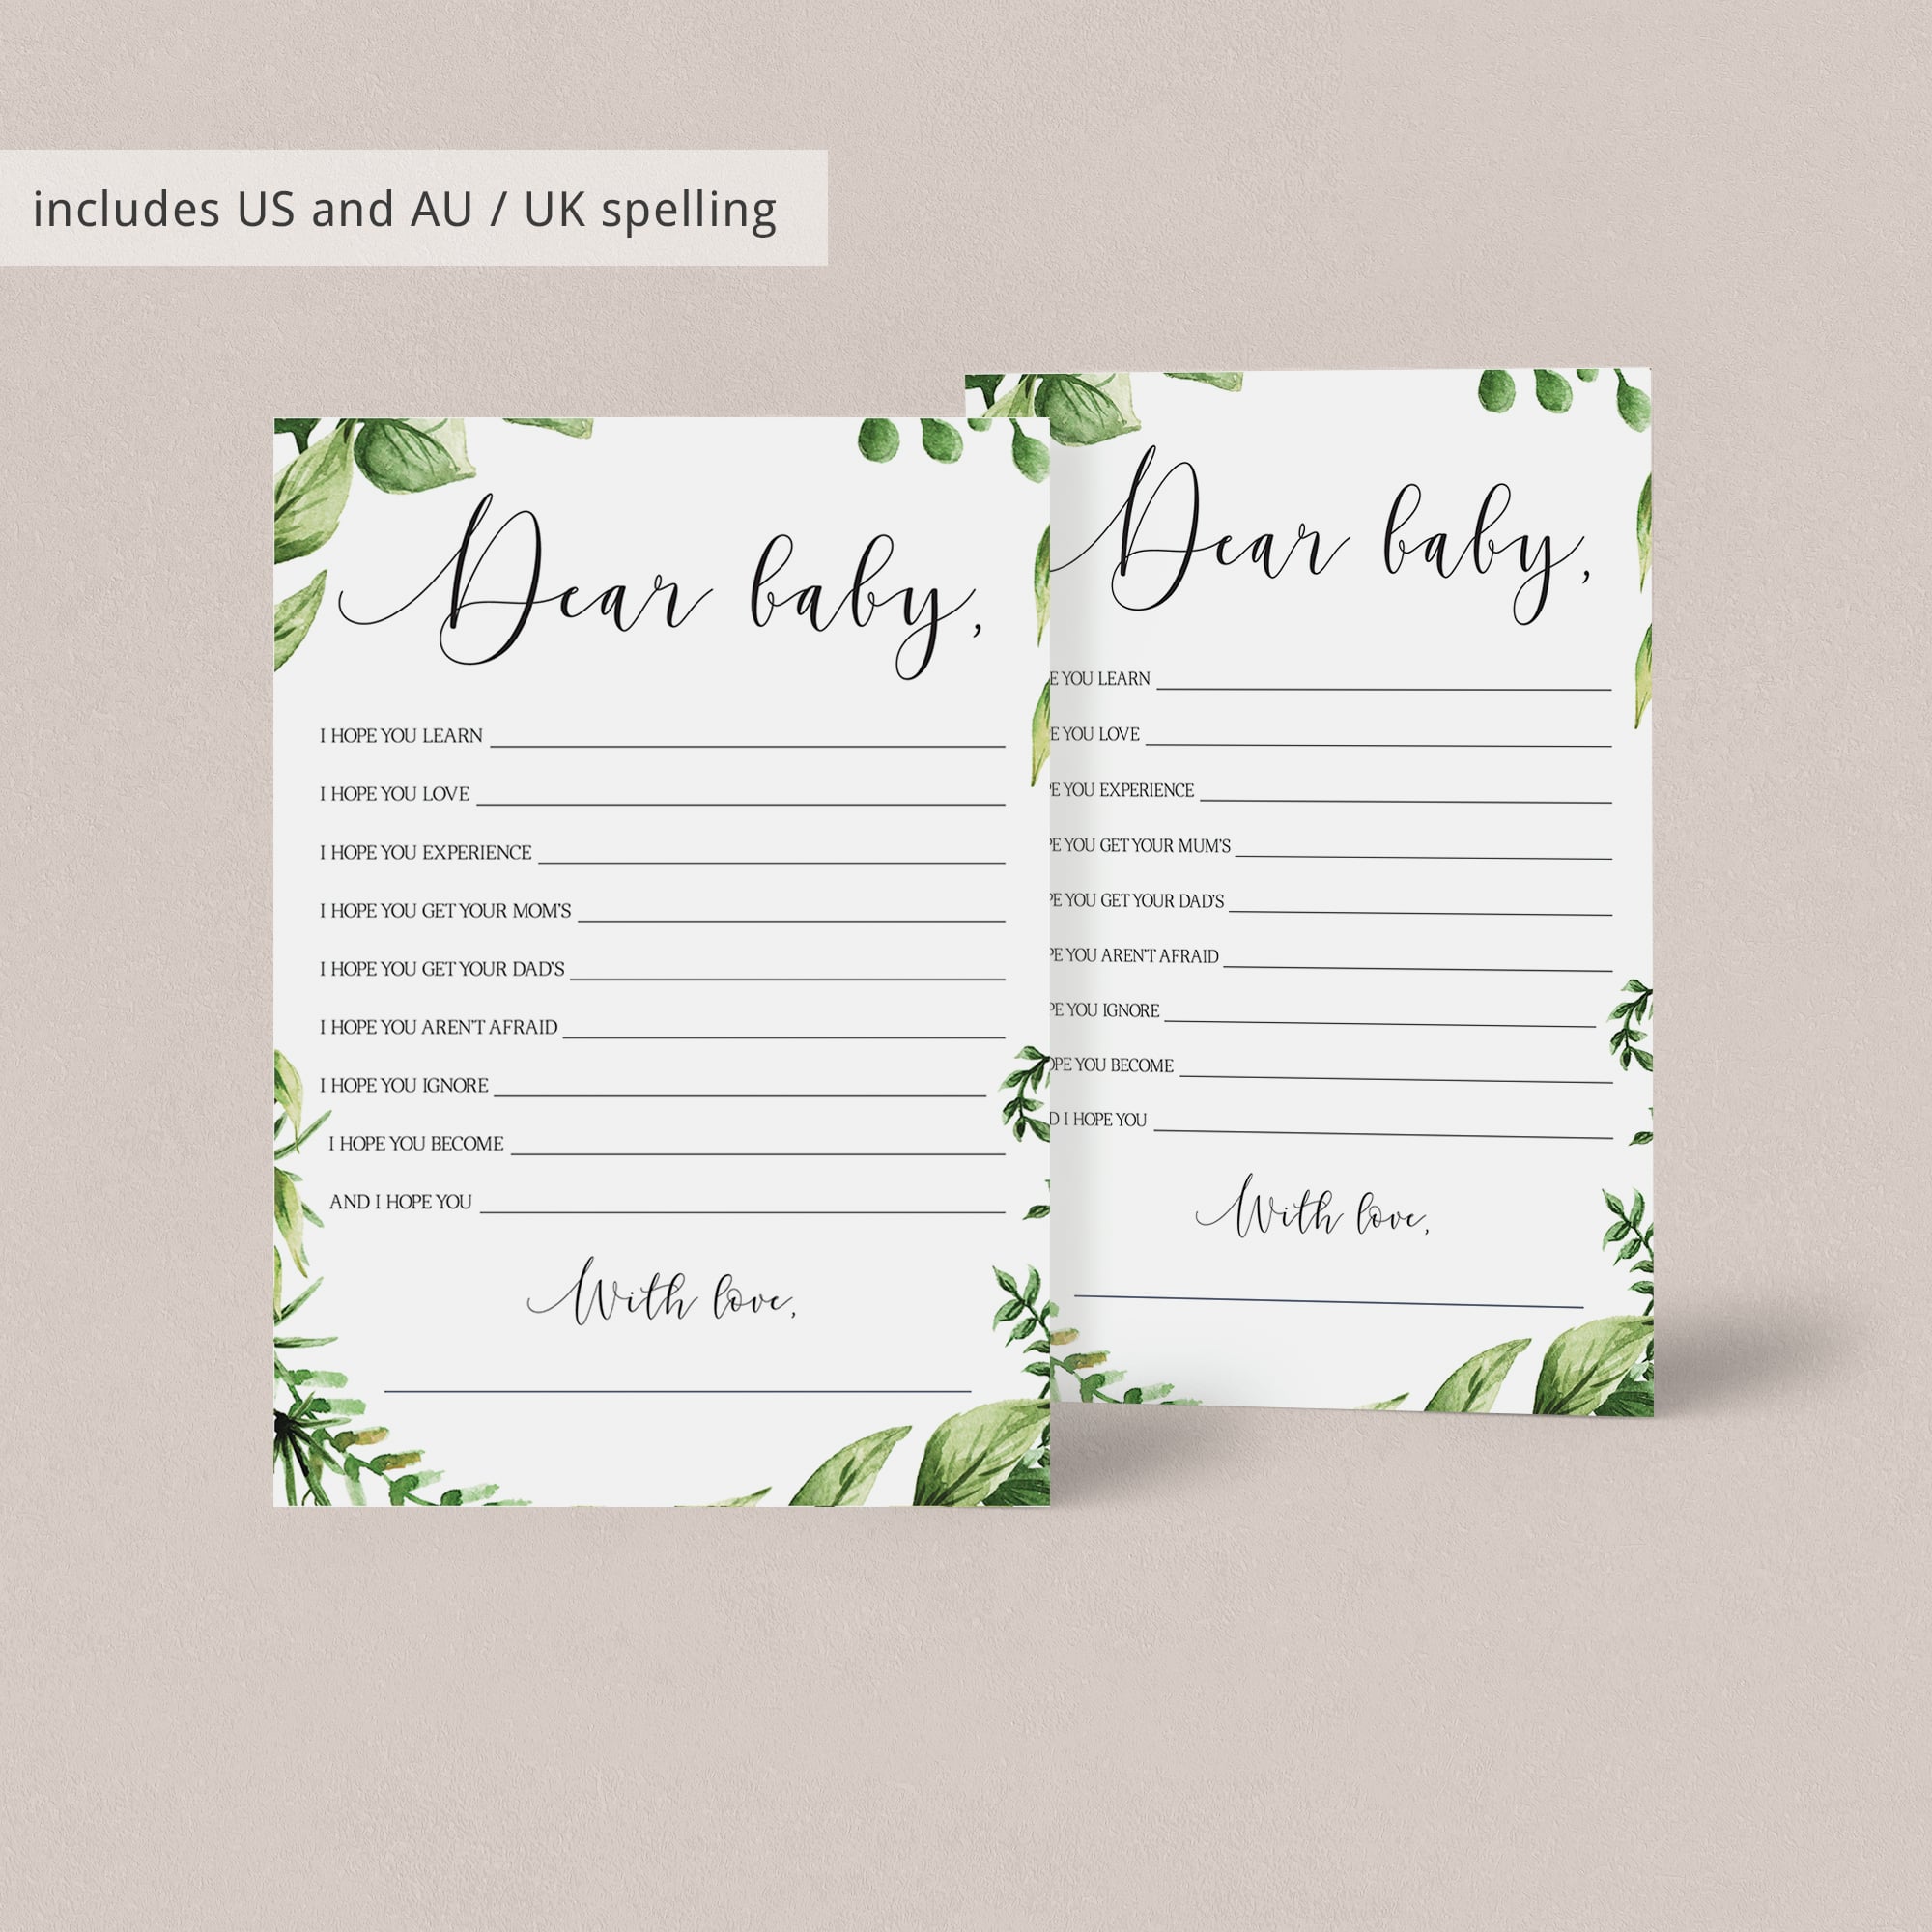 Baby wishes cards for the new mum au and uk spelling by LittleSizzle